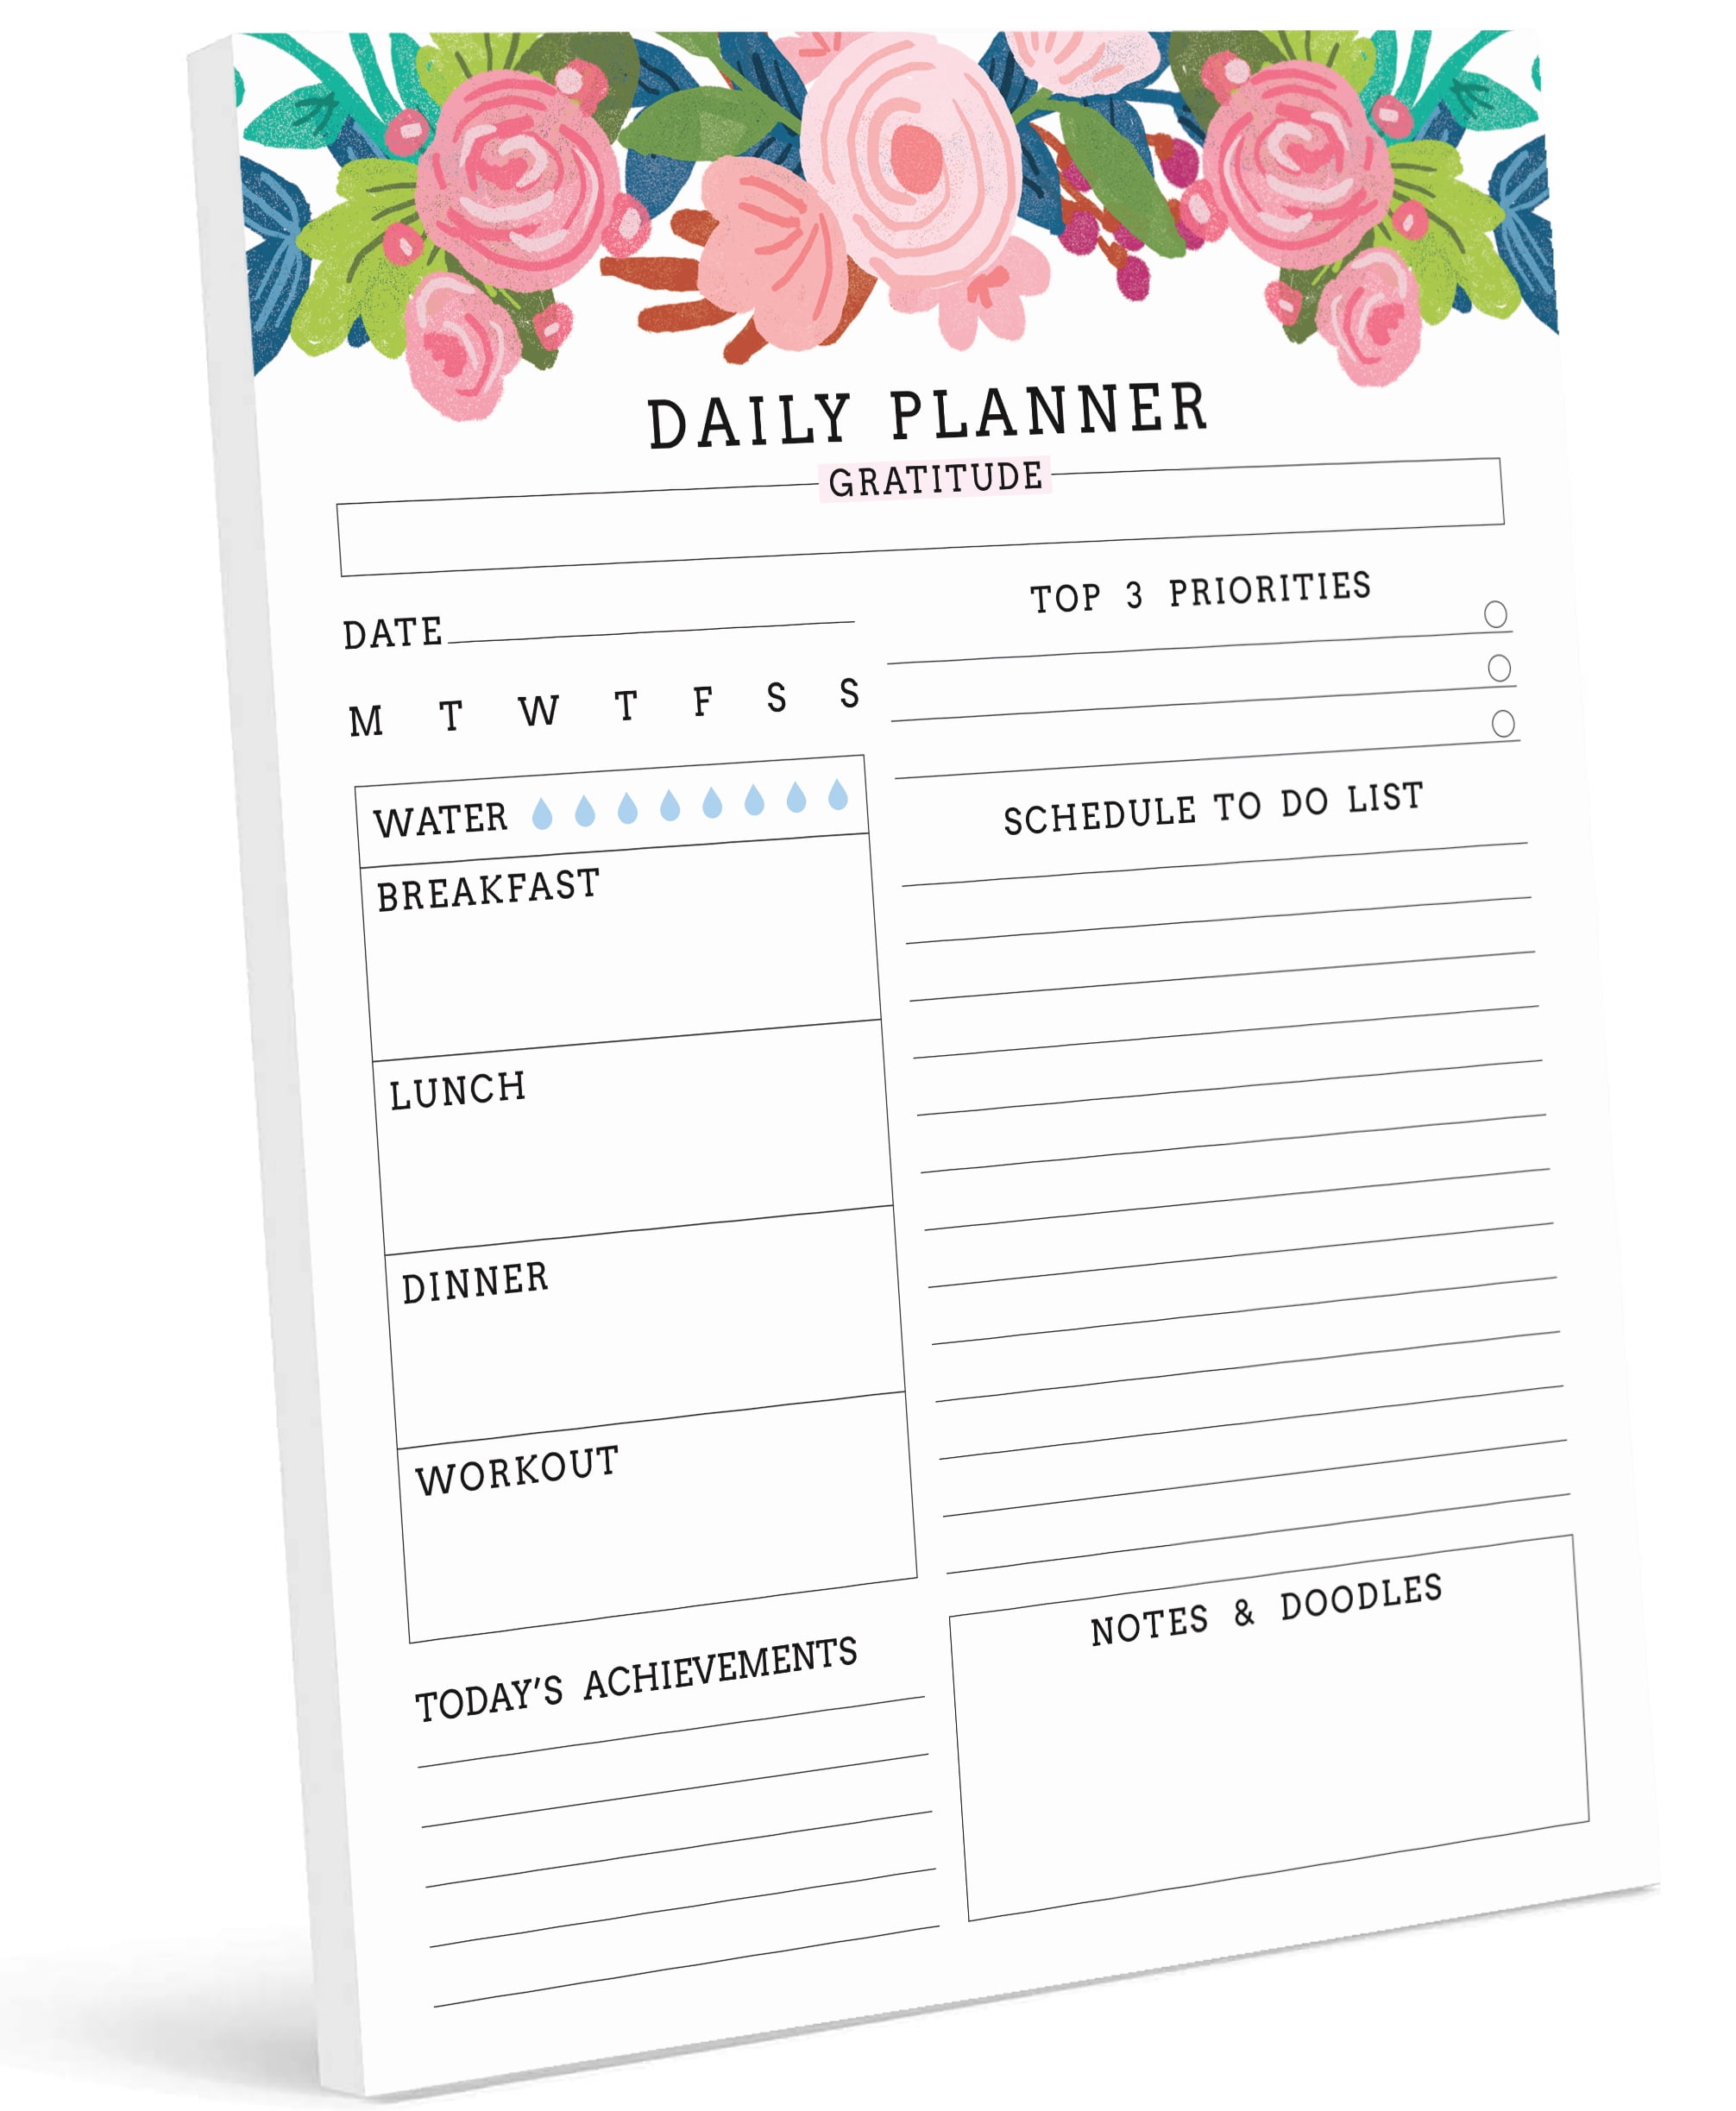 Daily Planner Notepad With 80 Undated Tear-Off Pages 6x9in., Daily To Do  List, Daily Schedule Notepad, Fitness Planner, Meal-Planning, Daily Planner